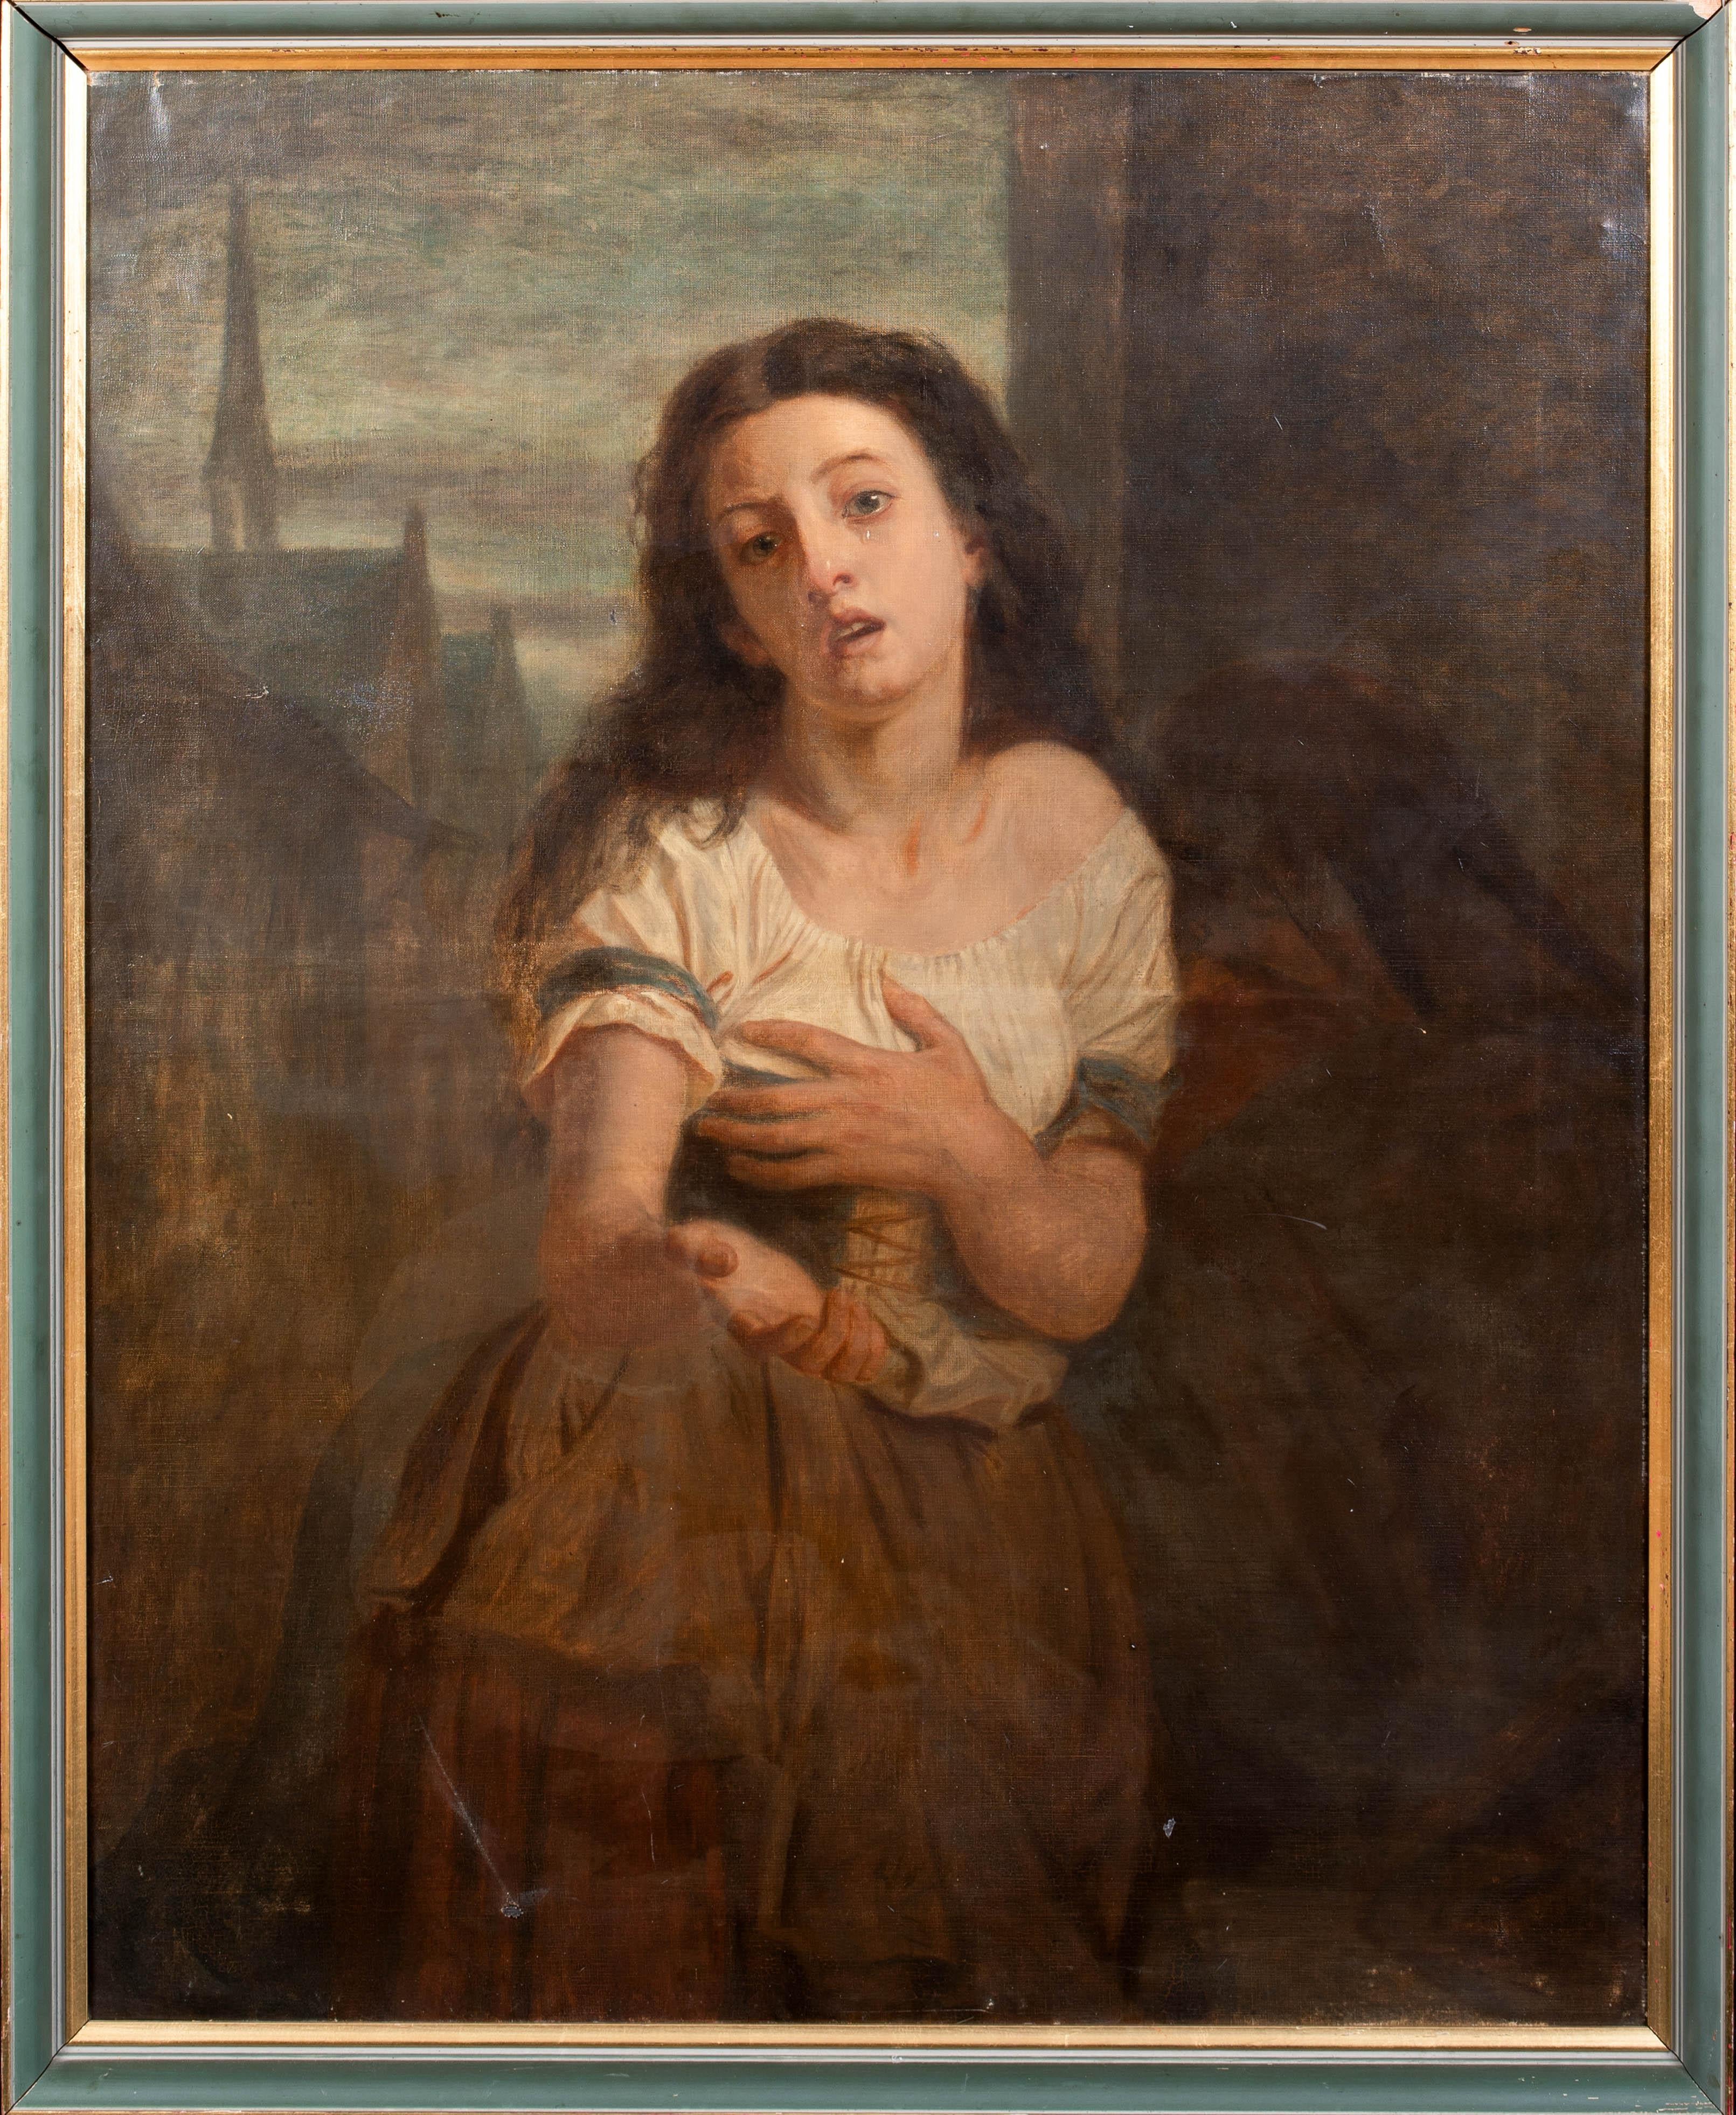 Unknown Portrait Painting - The Beggar Girl, 19th century  Pre-Raphaelite  Large 19th 